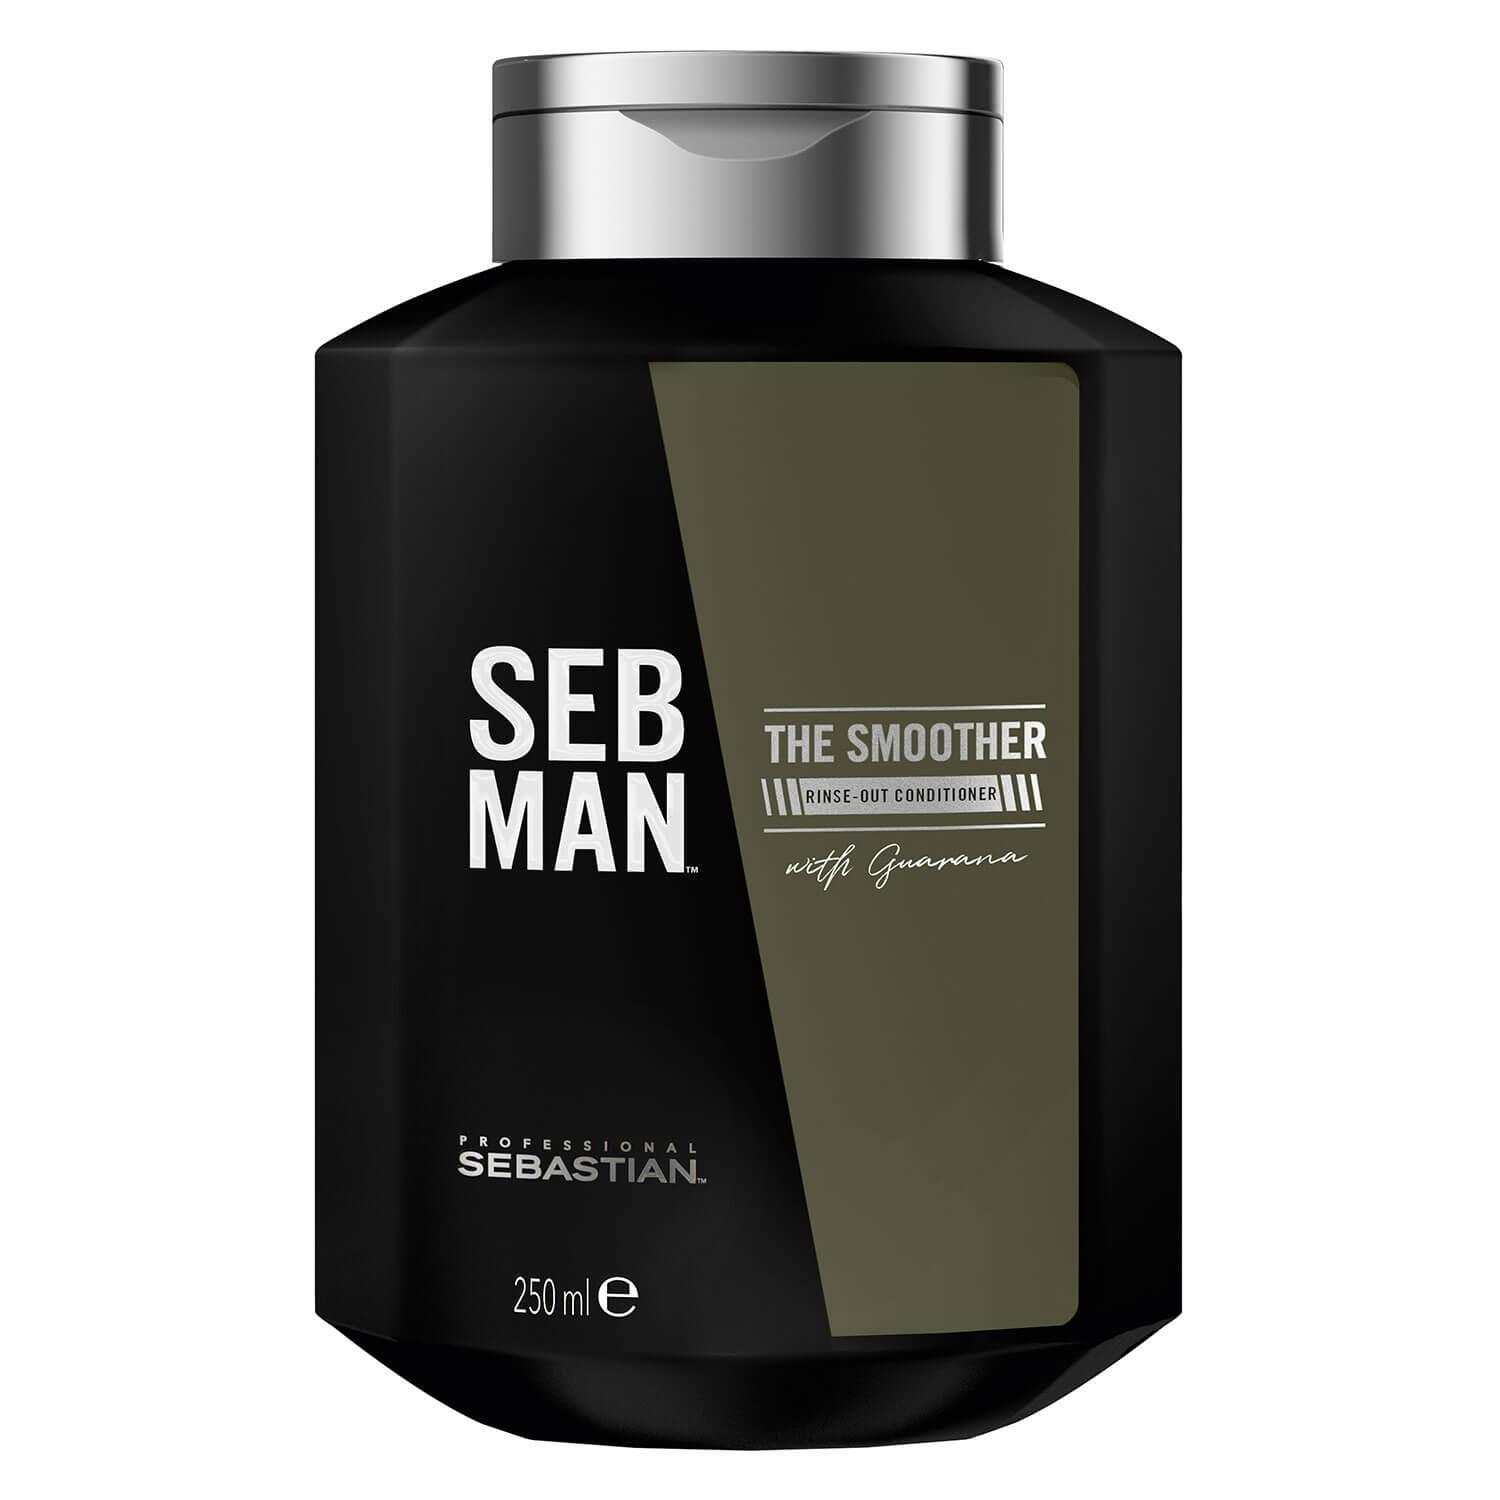 SEB MAN - The Smoother Rinse-Out Conditioner